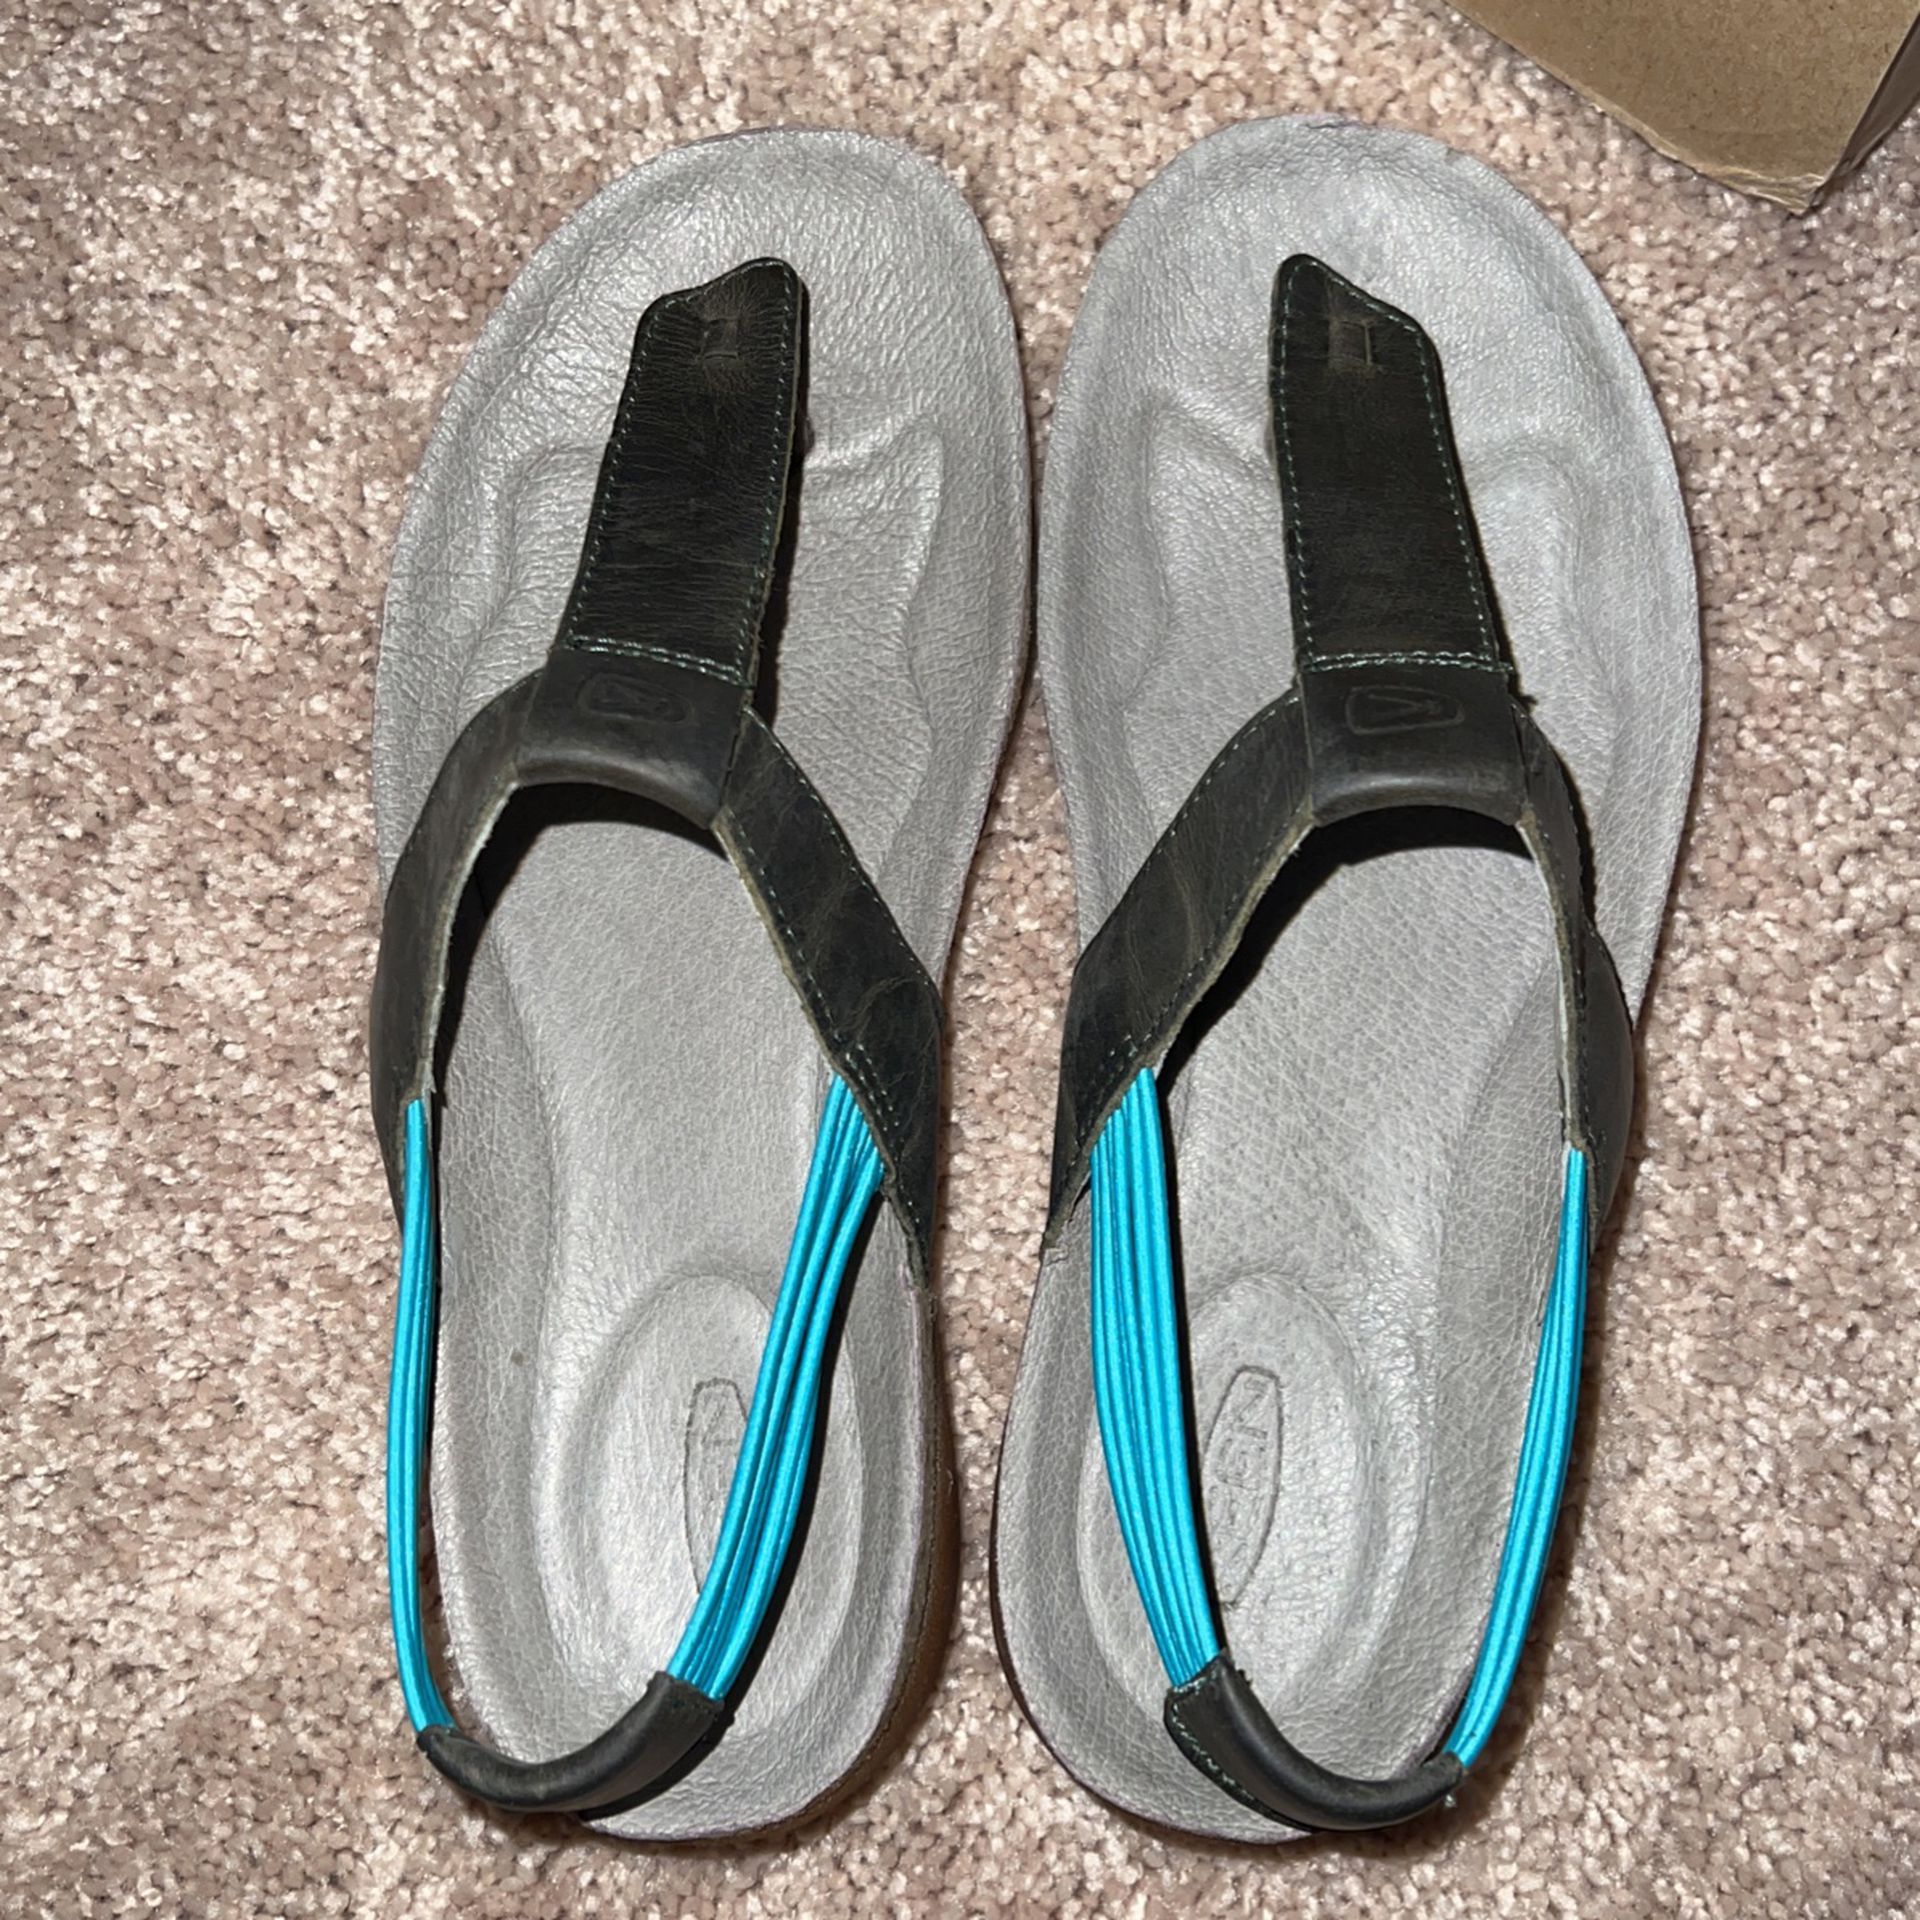 Keen Sandals Size 5 Brand New In The Box 